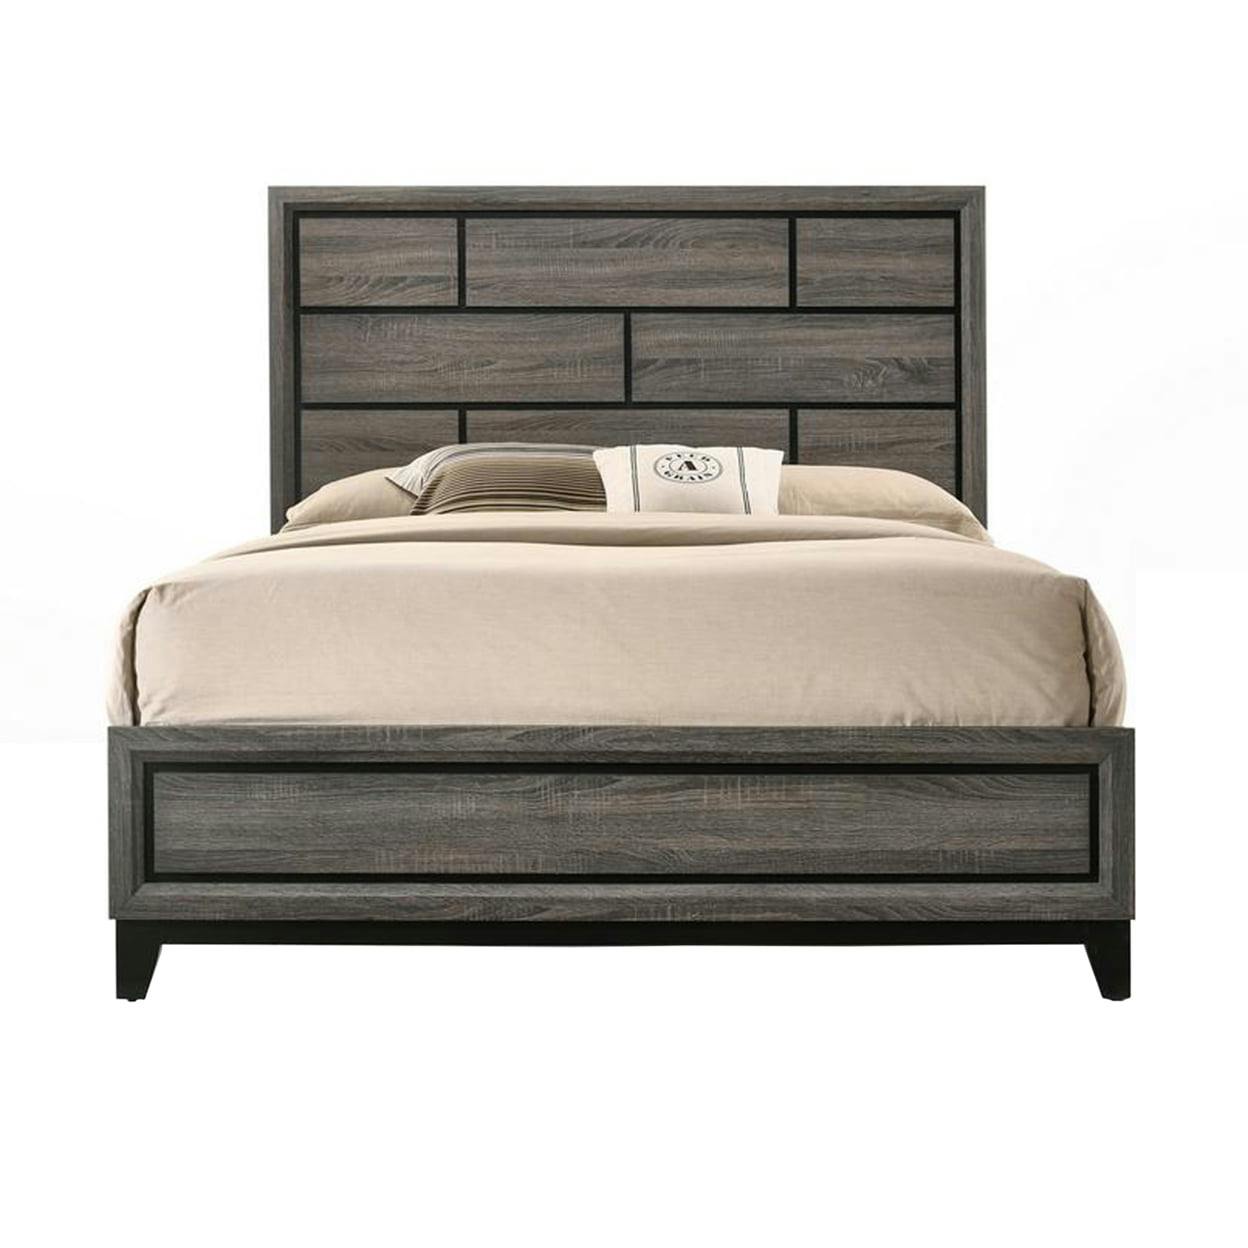 Elegant Weathered Gray Queen Bed with Upholstered Headboard